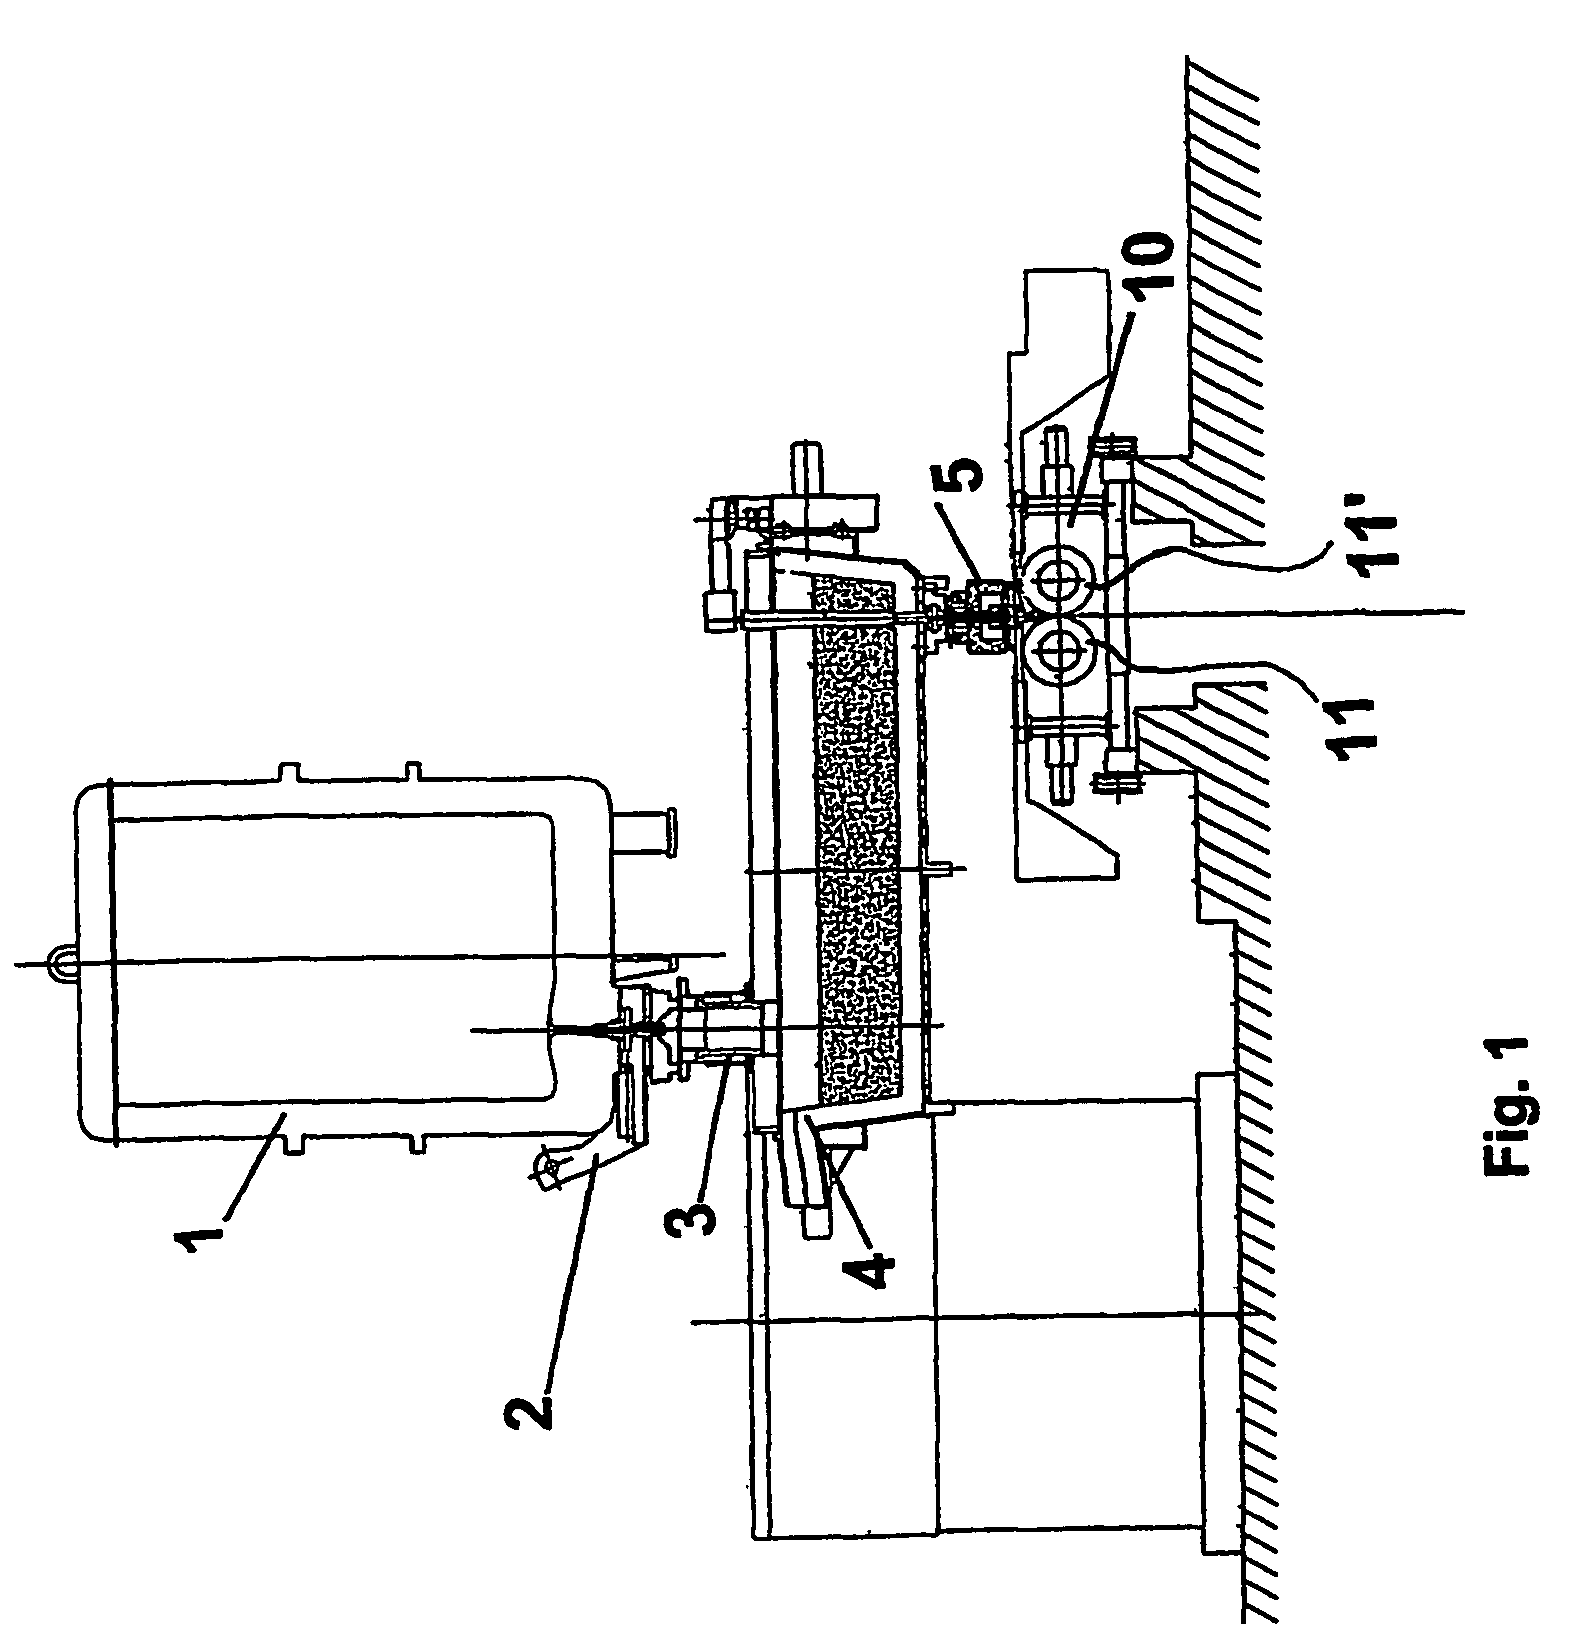 Roll support device for continuous metallic strip casting